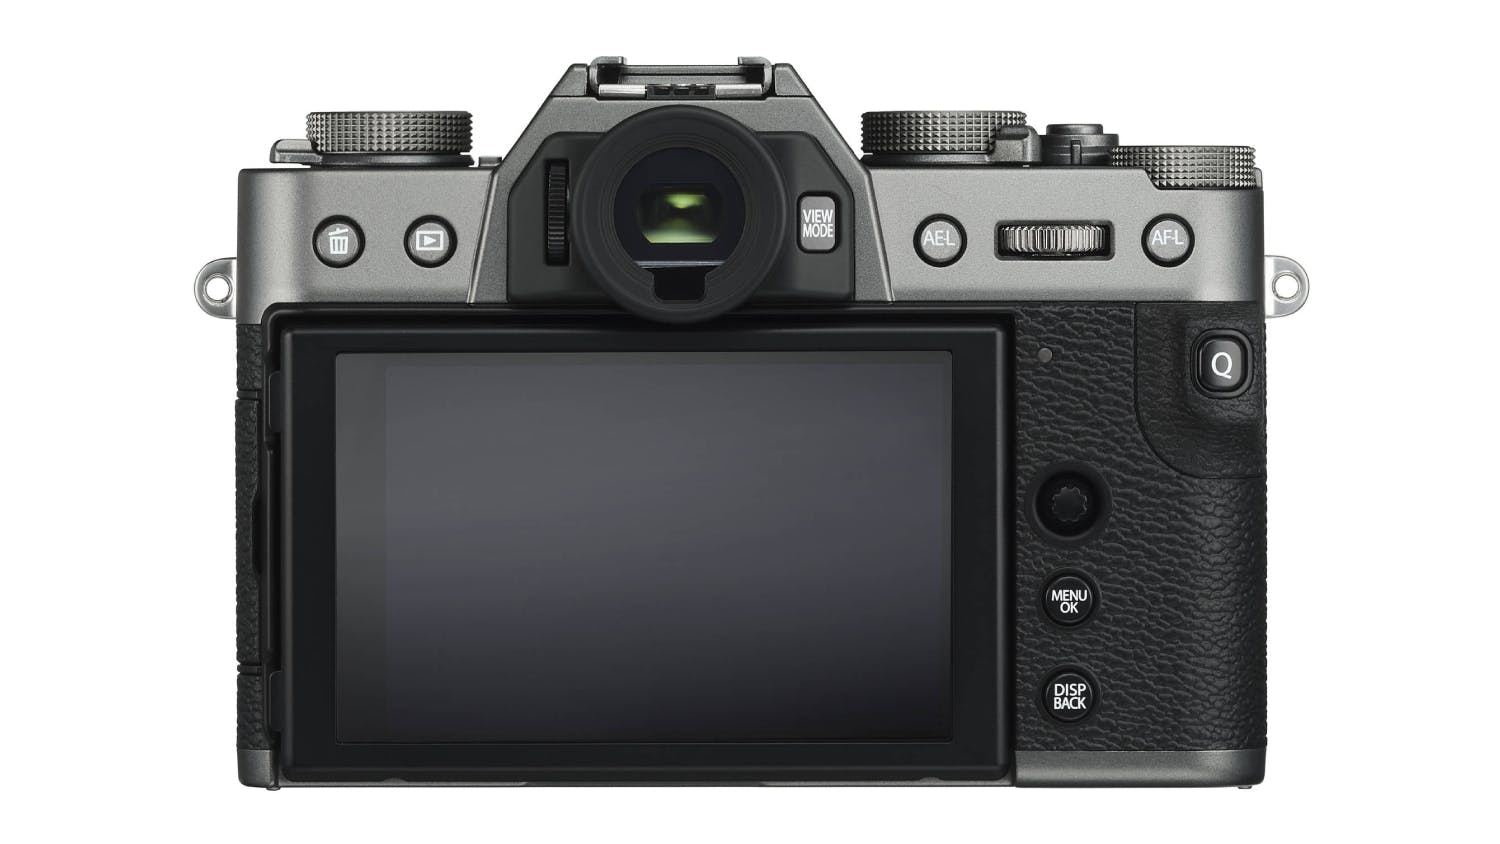 Fujifilm X-T30 Mirrorless Camera with 15-45 mm f/3.5-5.6 XC Lens - Charcoal Silver